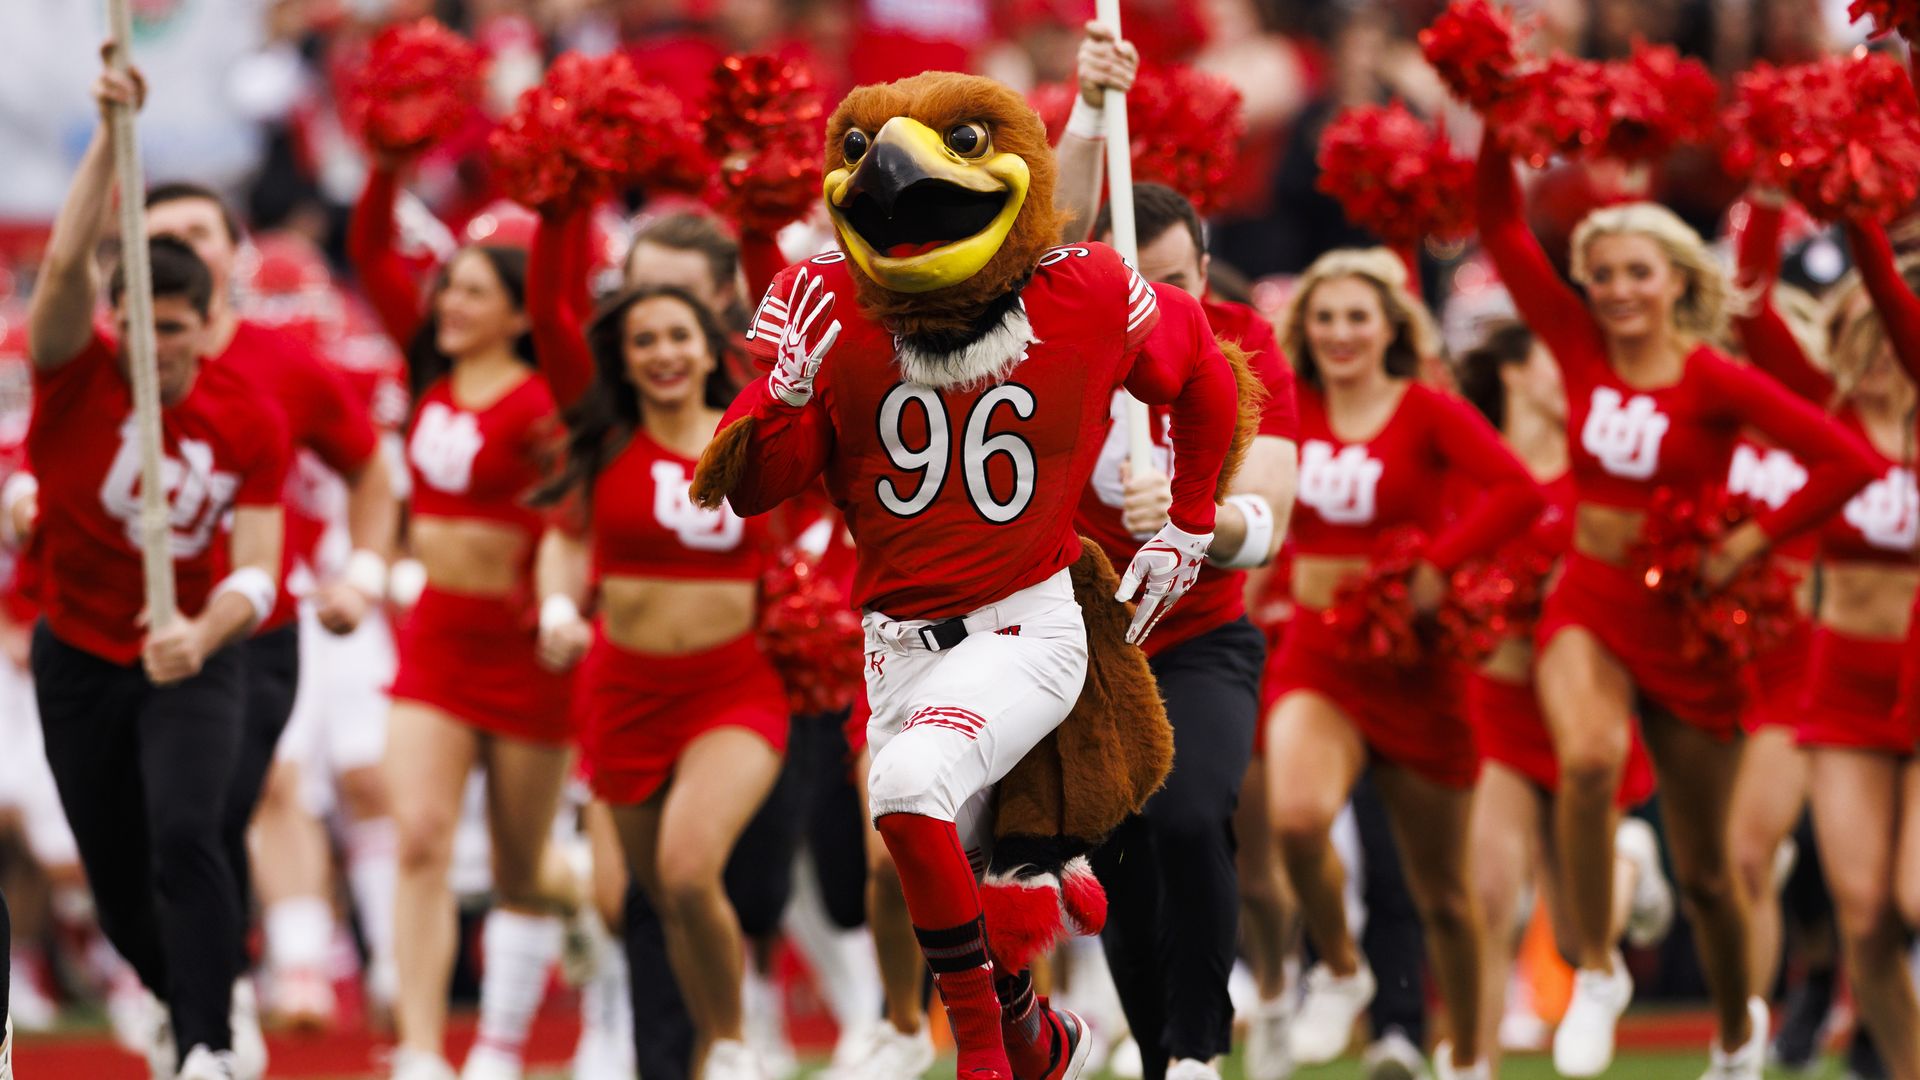 A mascot in a red 96 jersey runs onto the field before a football game